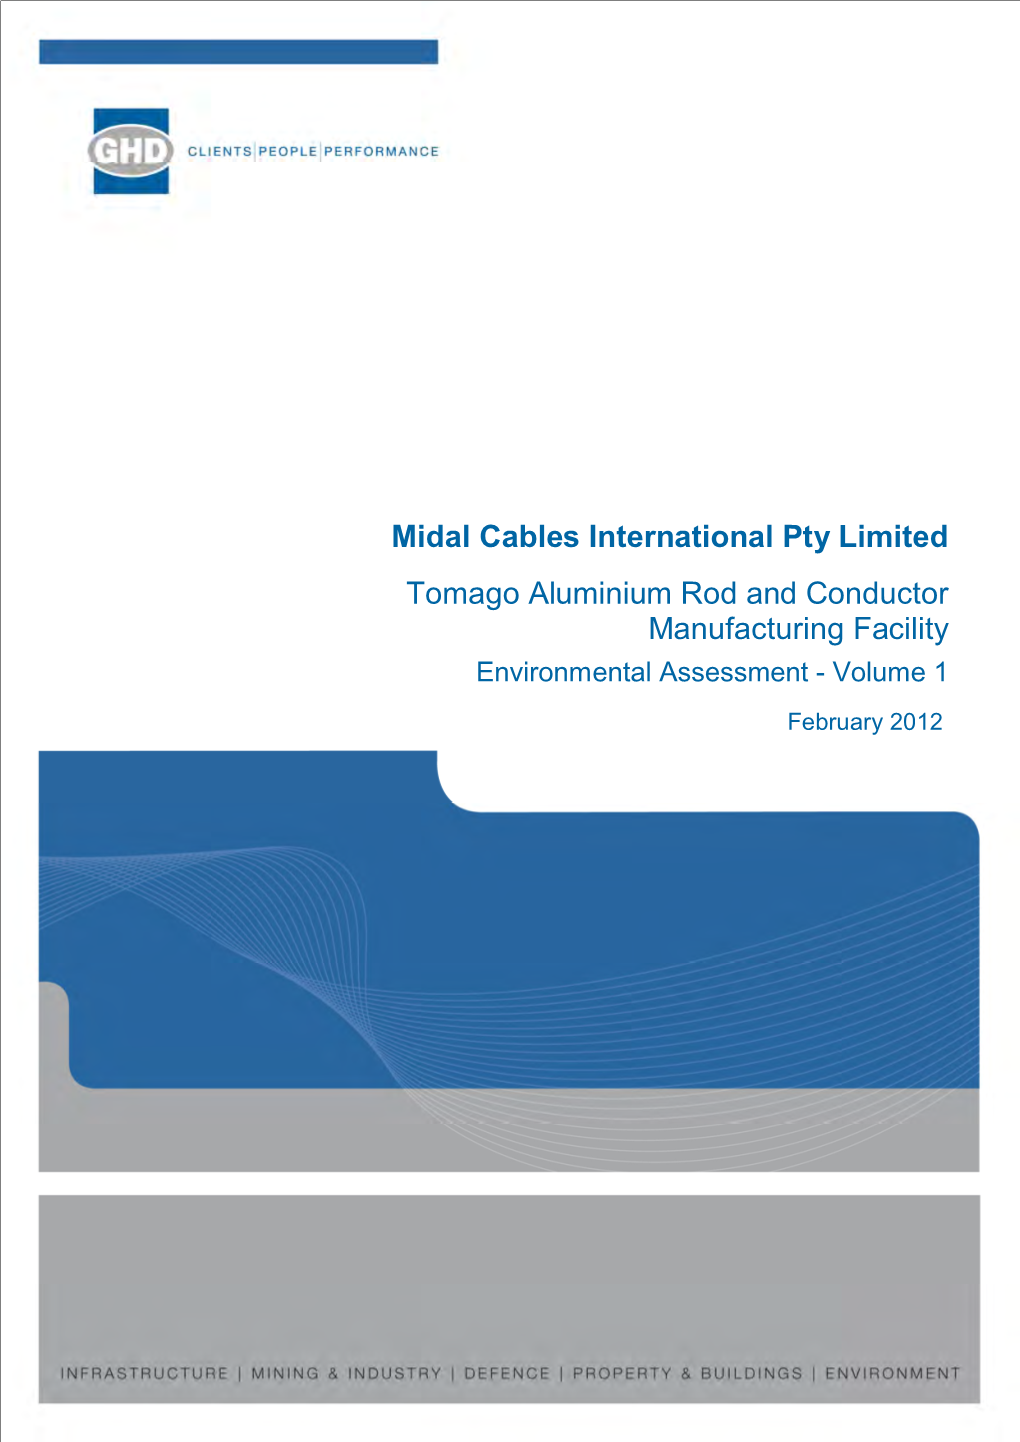 Midal Cables International Pty Limited Tomago Aluminium Rod and Conductor Manufacturing Facility Environmental Assessment - Volume 1